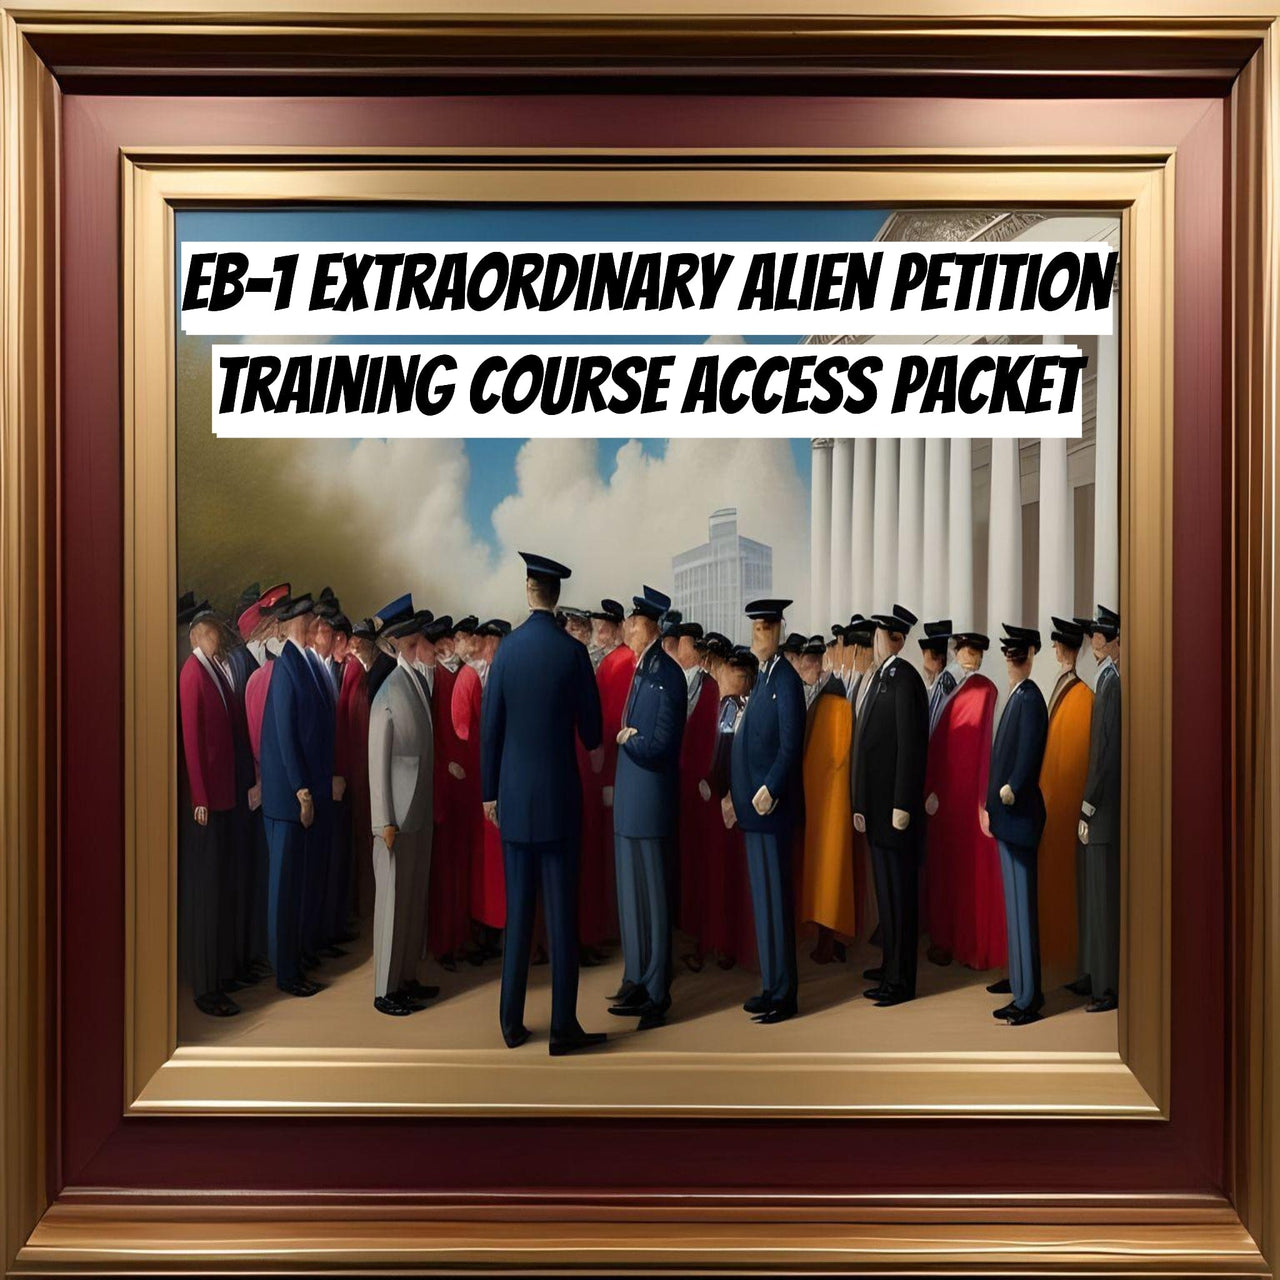 Rocket Immigration Petitions Immigration Visa EB-1 Extraordinary Alien Petition Training Course Access Packet